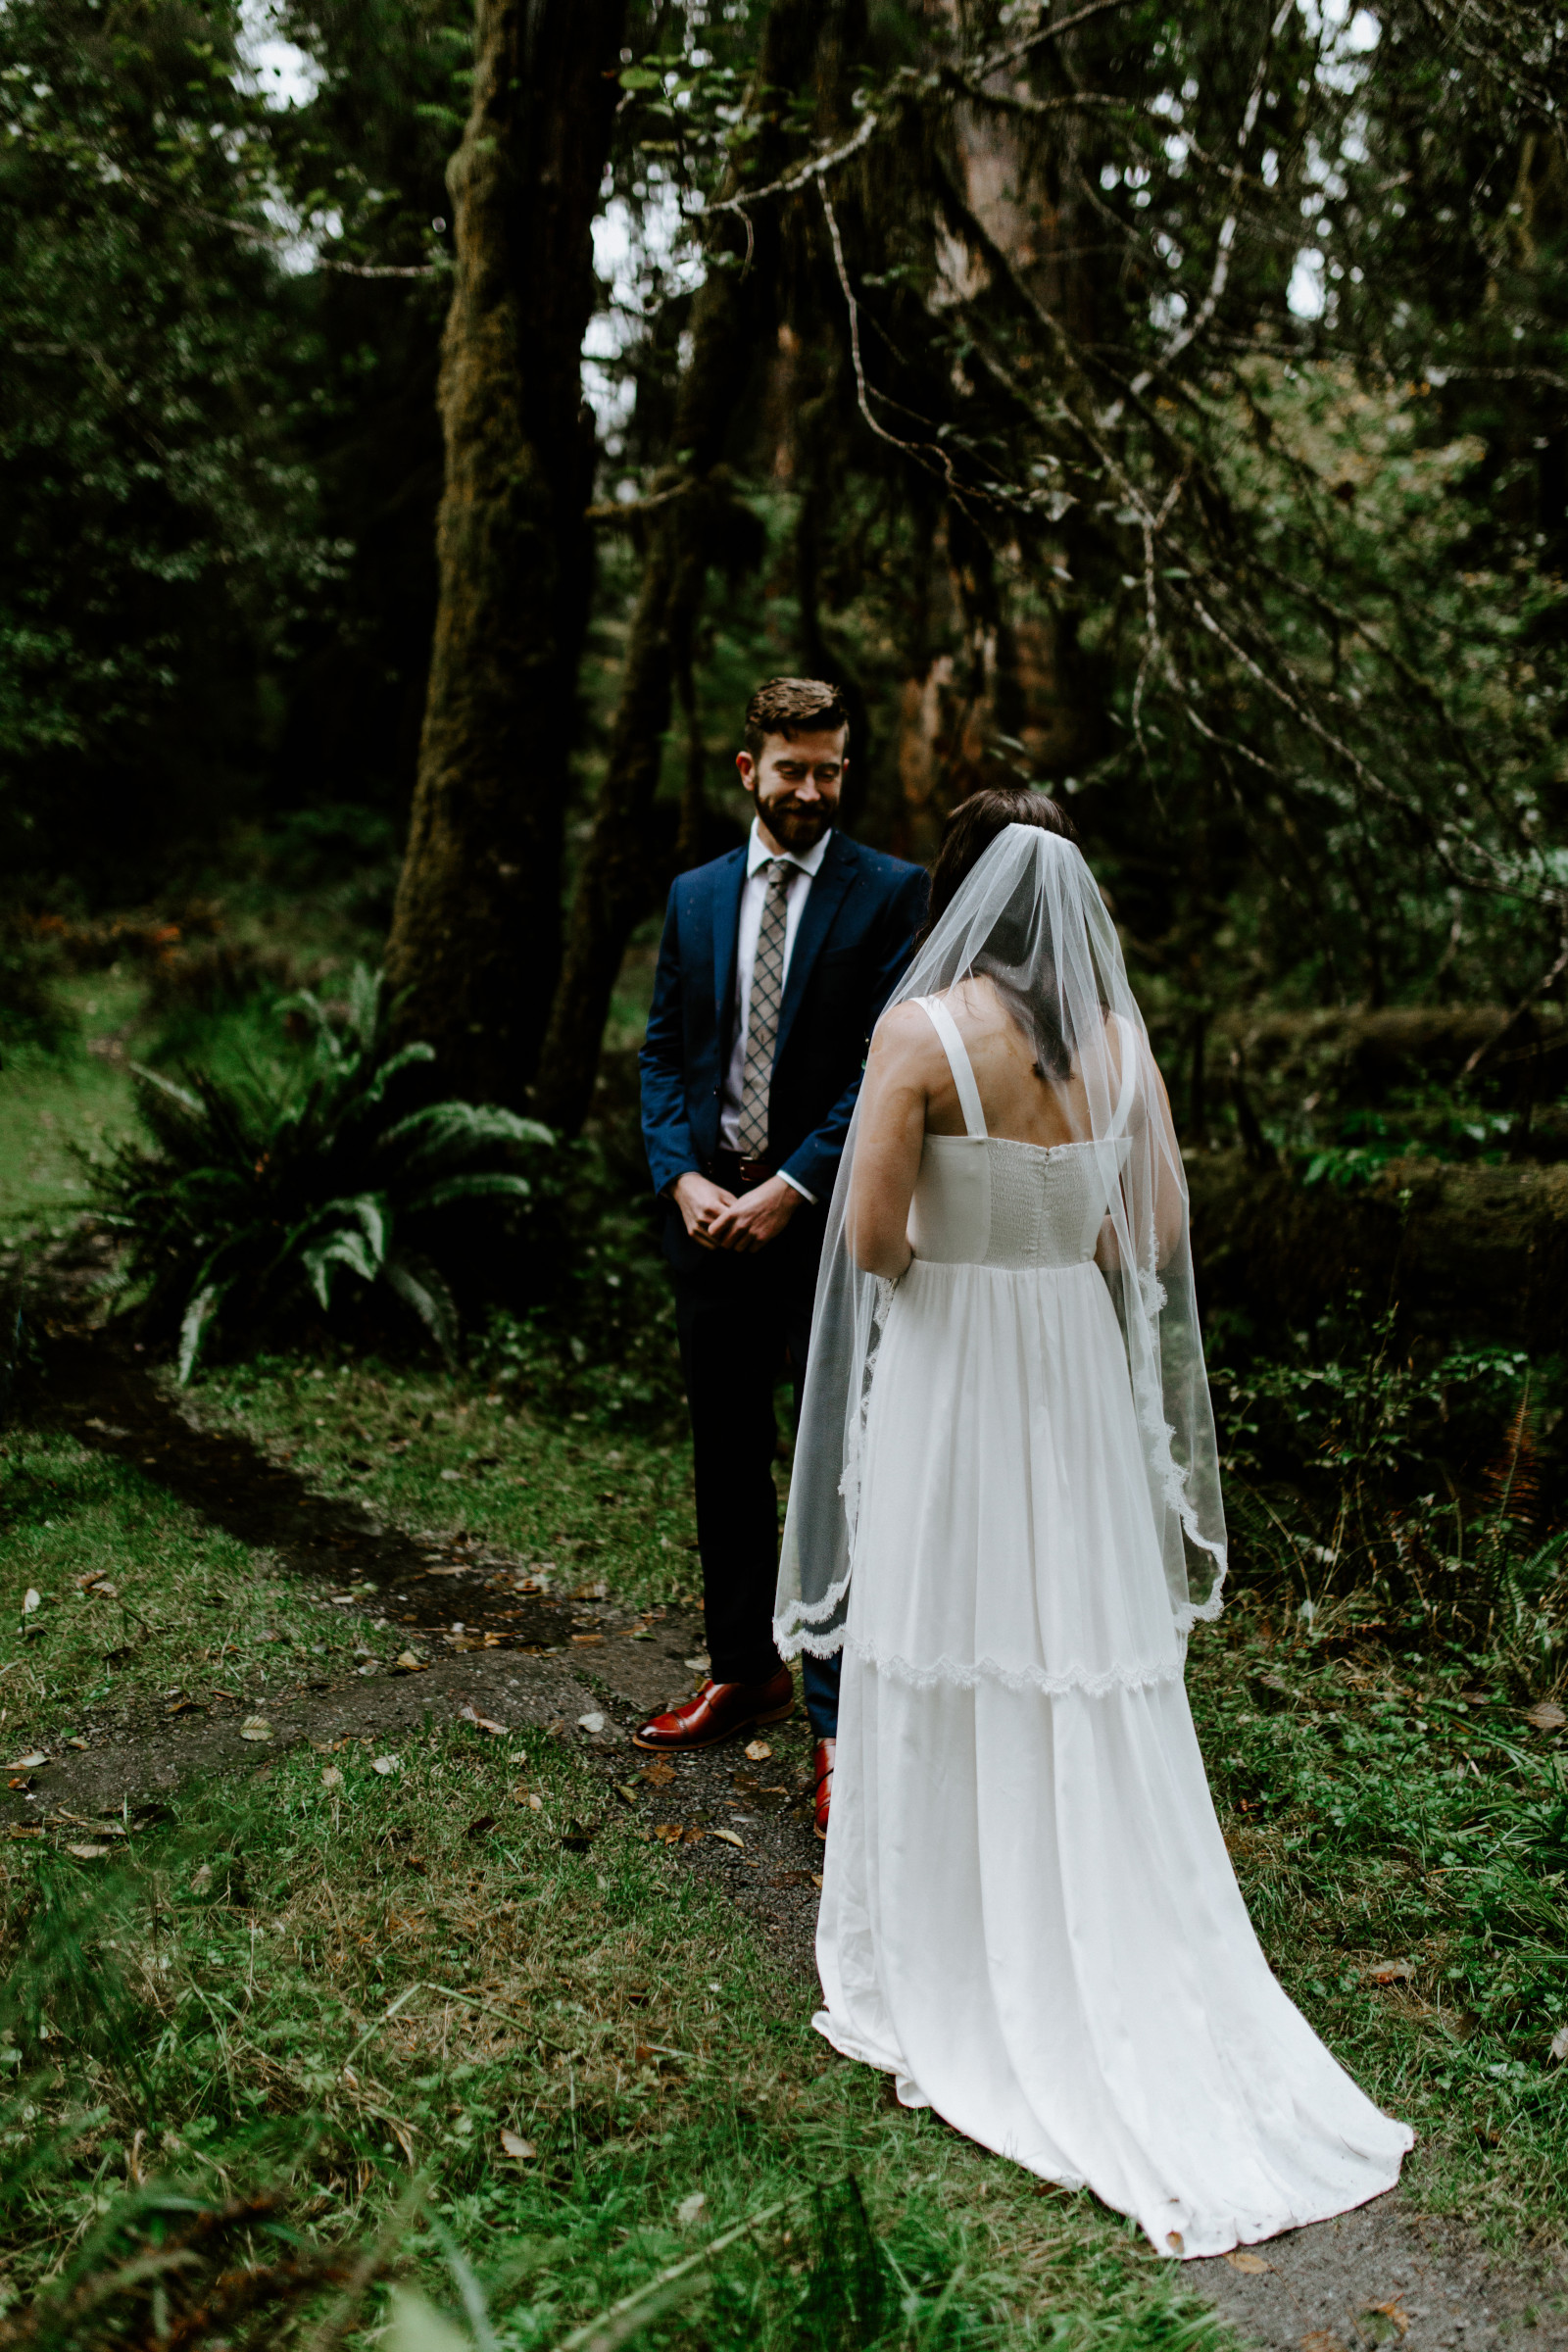 Corey looks at Mollie. Elopement photography in the Olympic National Park by Sienna Plus Josh.